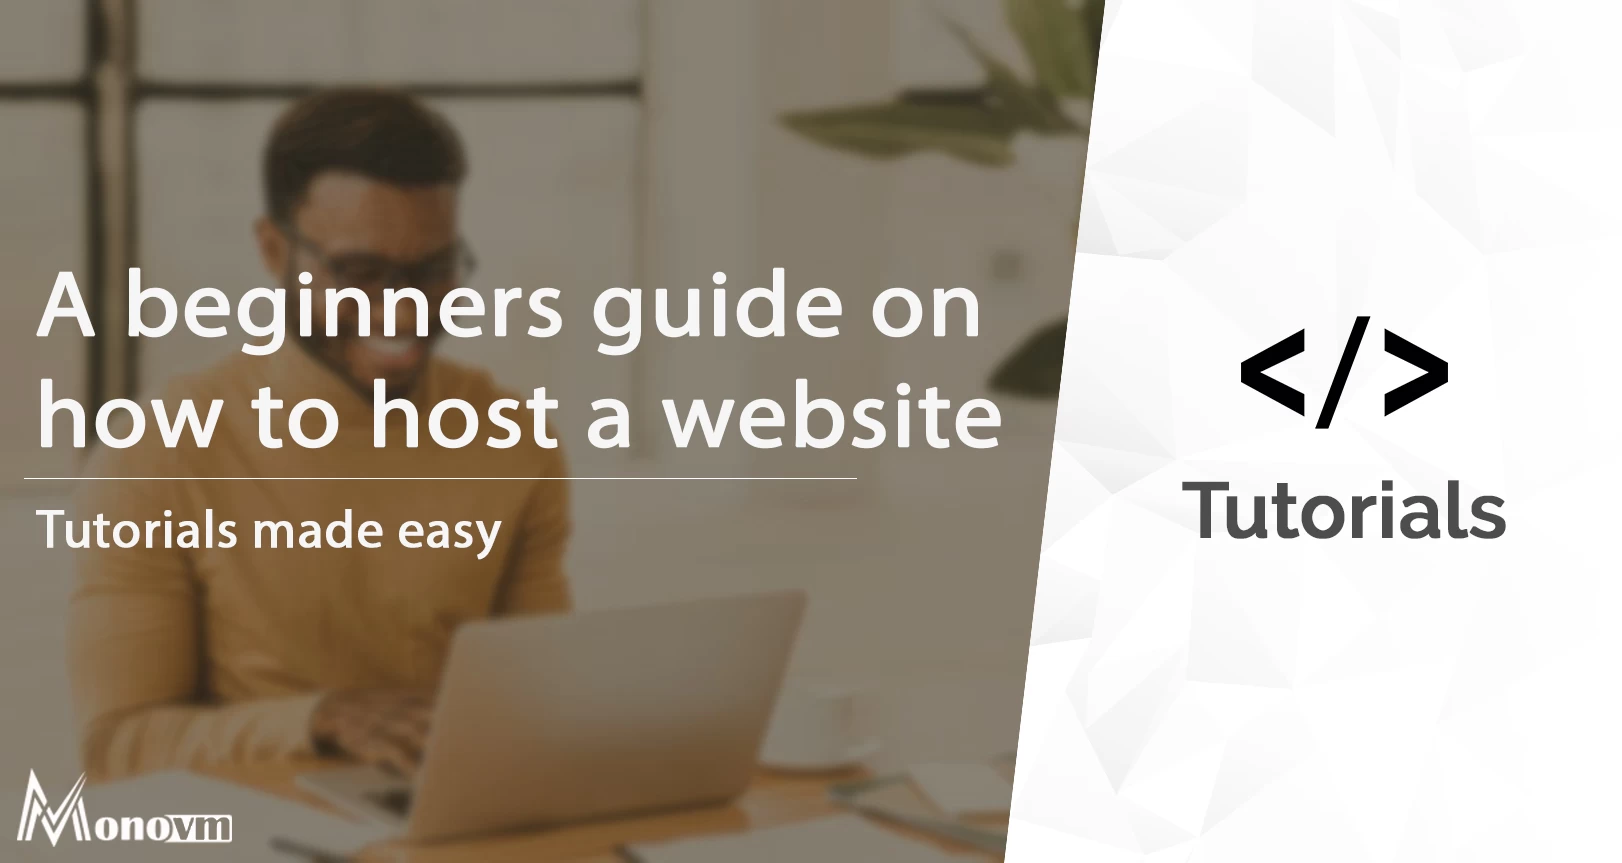 A Beginner's Guide to Hosting a Website: What You Need to Know